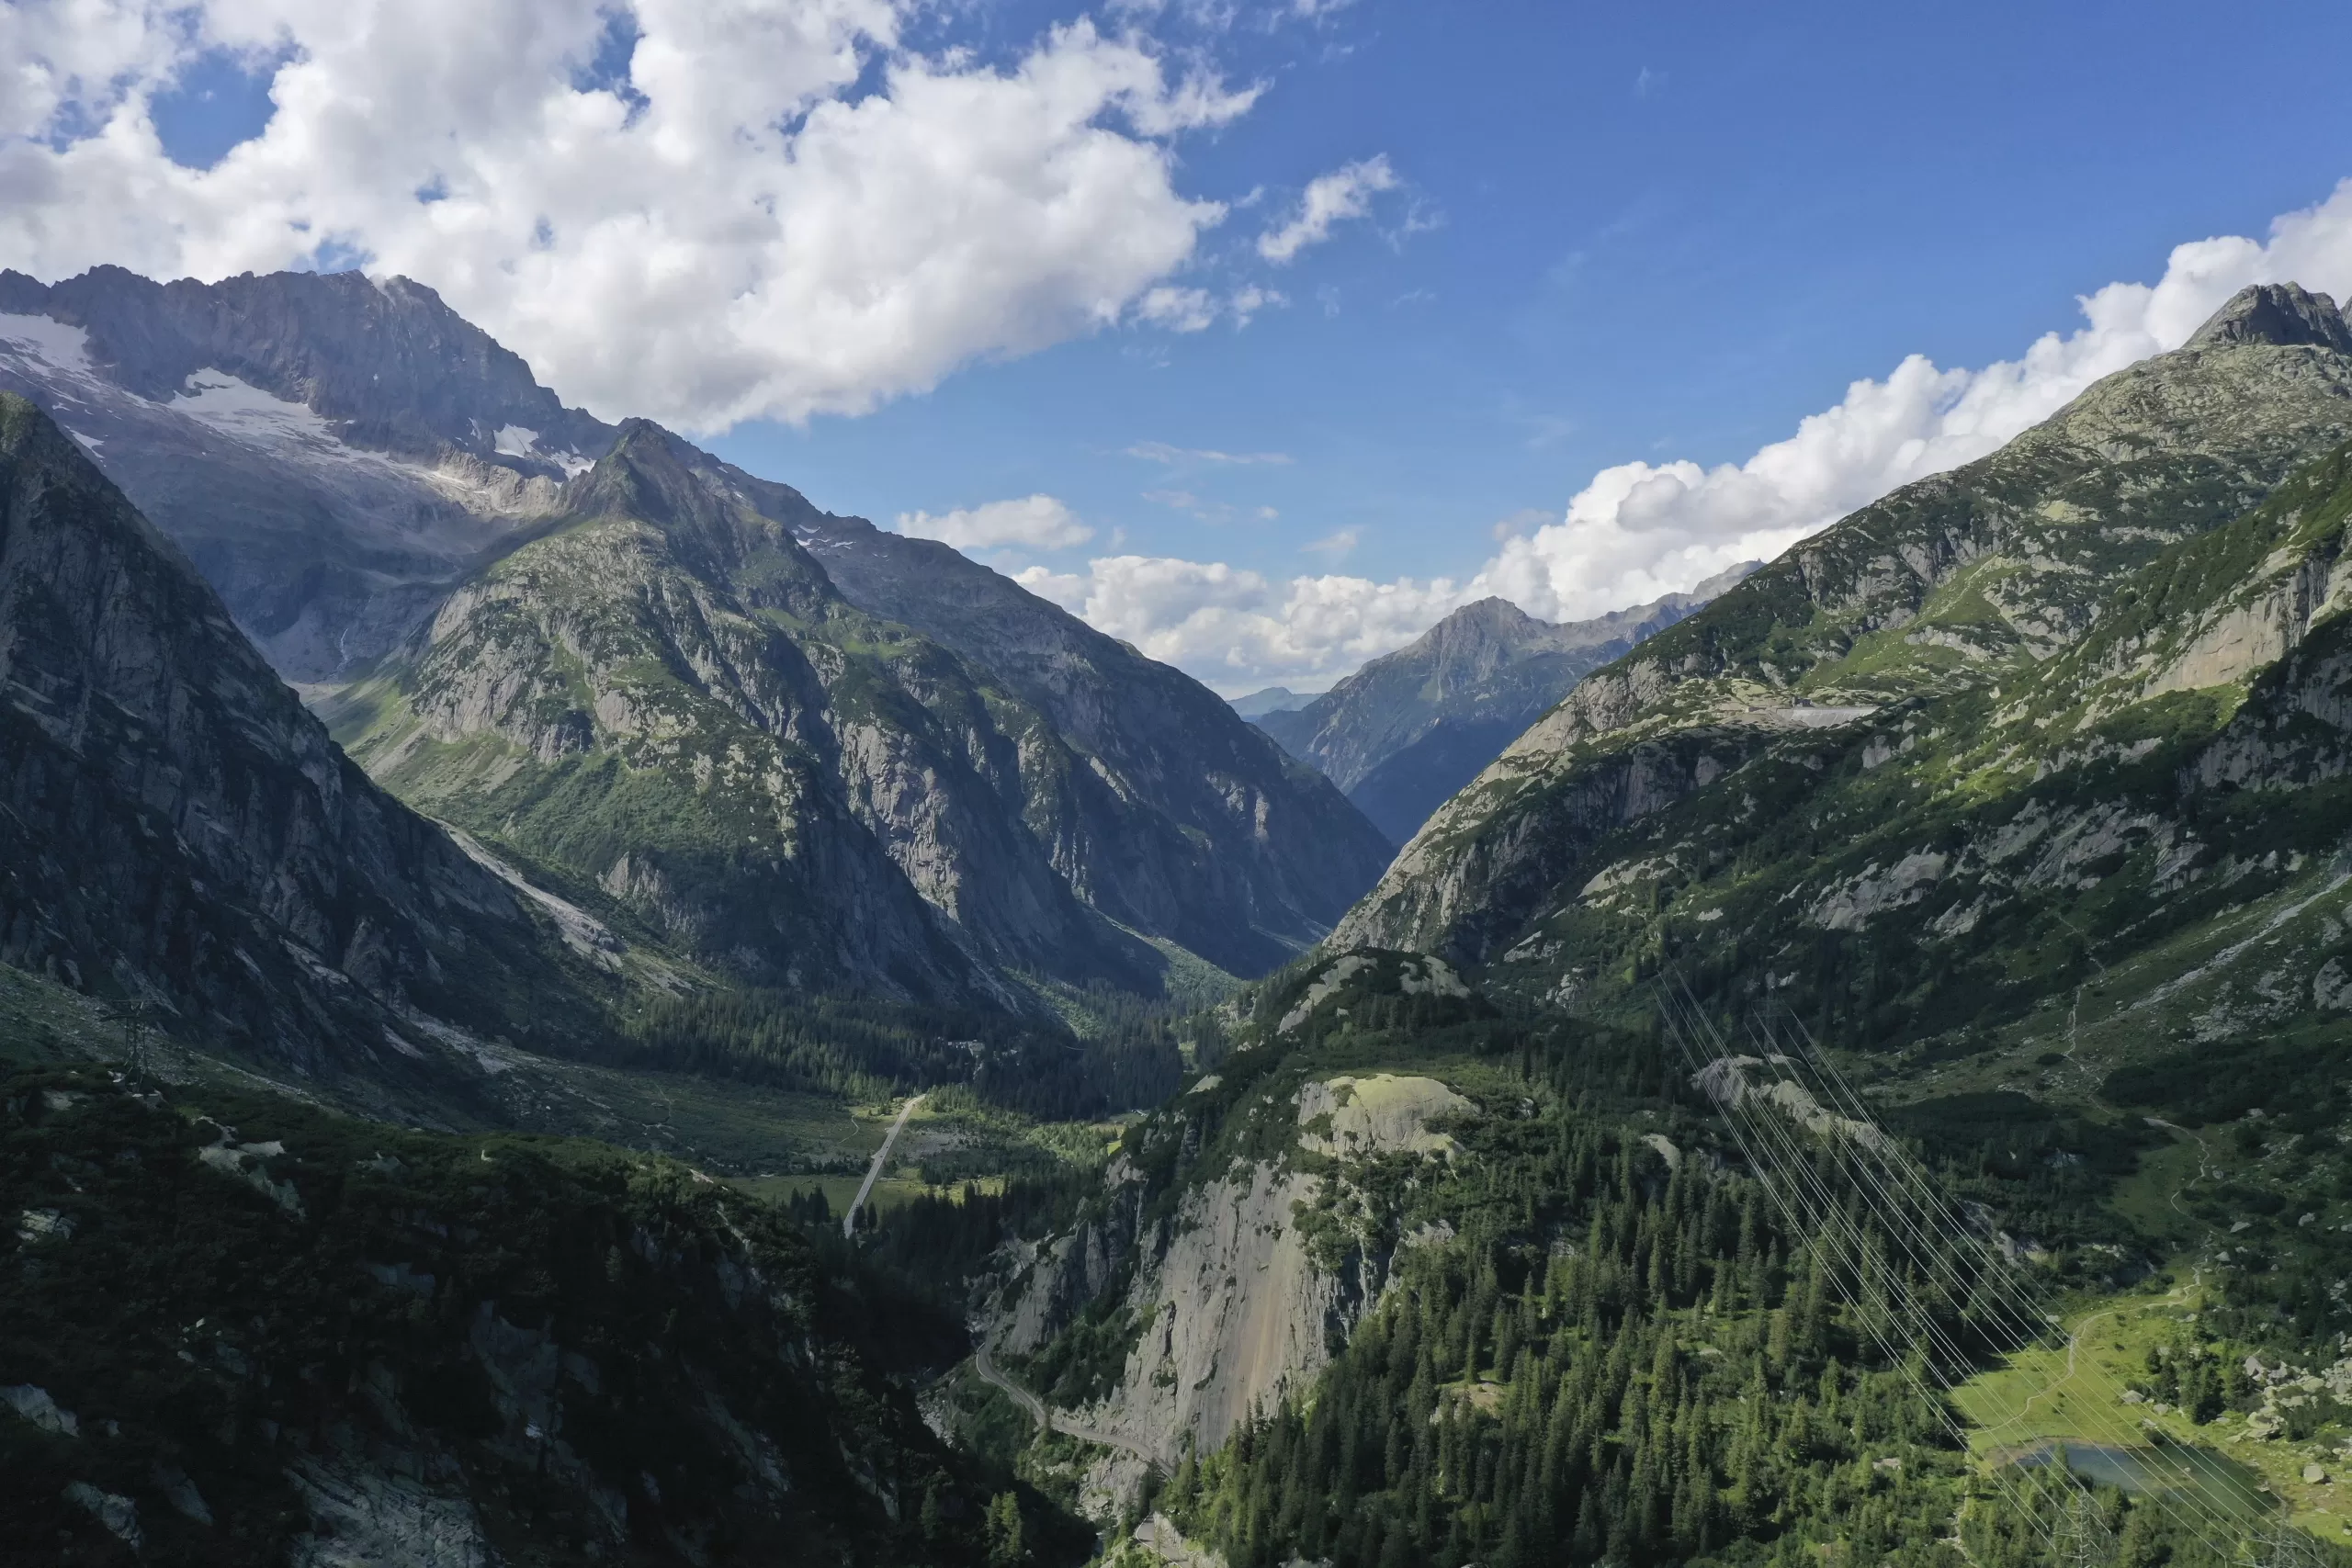 Granite landscape in Central Switzerland. The dome in the centre of the picture was rounded by the action of glacier ice, while the peaks in the background have retained their sharp edges. Photo: Nagra